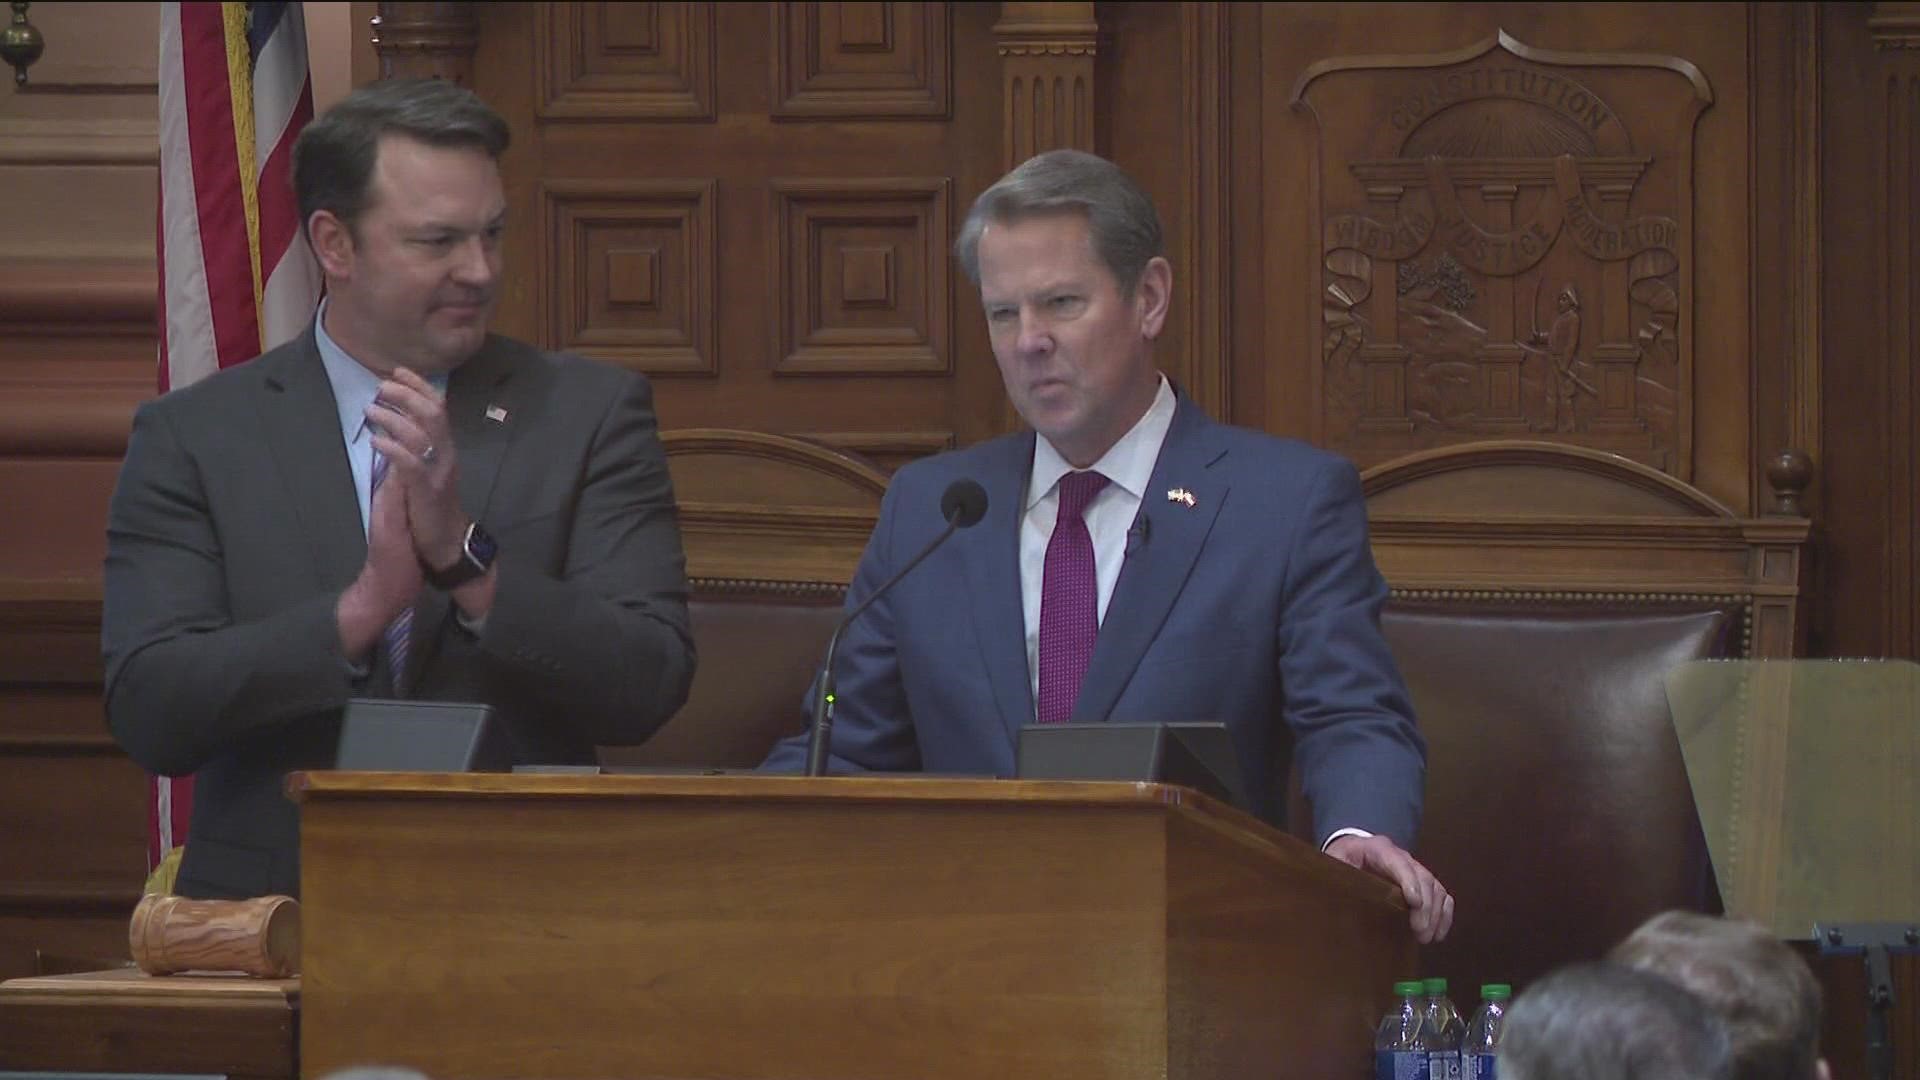 On Wednesday morning, Kemp discussed his fiscal budget which focuses primarily on funding for education and healthcare.